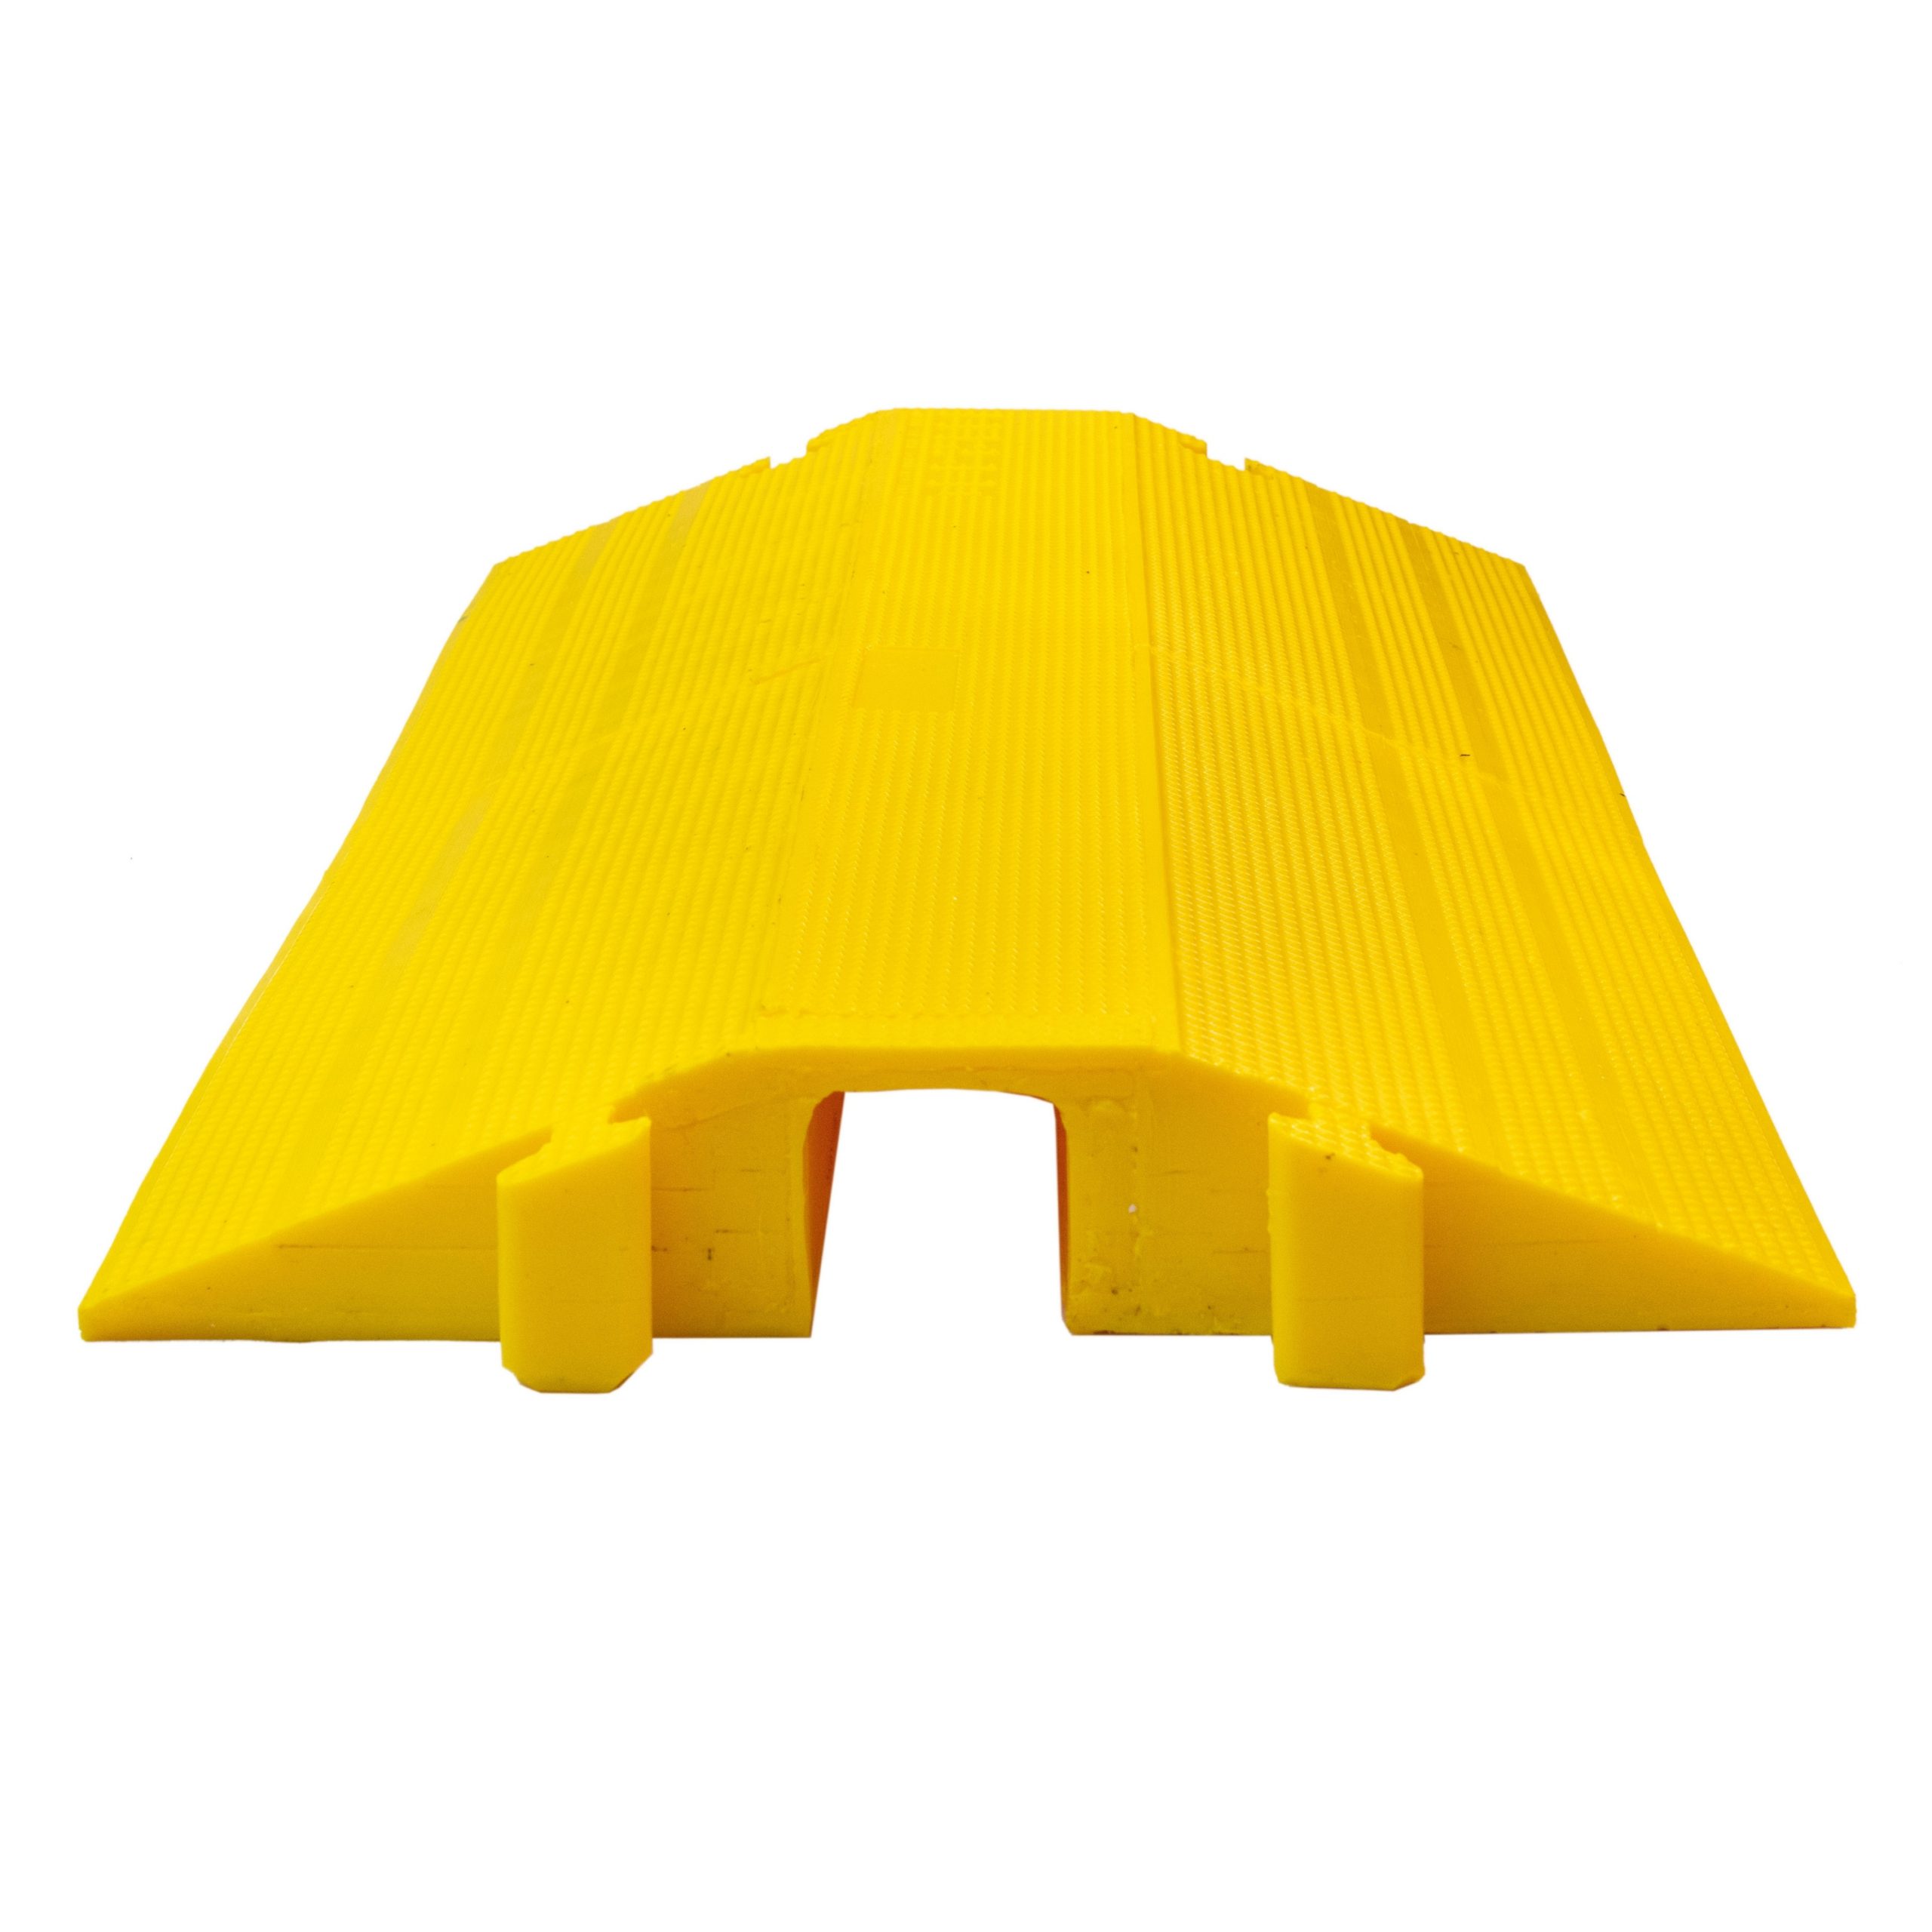 https://www.cableprotectorworks.com/wp-content/uploads/2021/04/Elasco-Products-Dropover-Cable-Protector-ED3310-Y-1-scaled.jpg